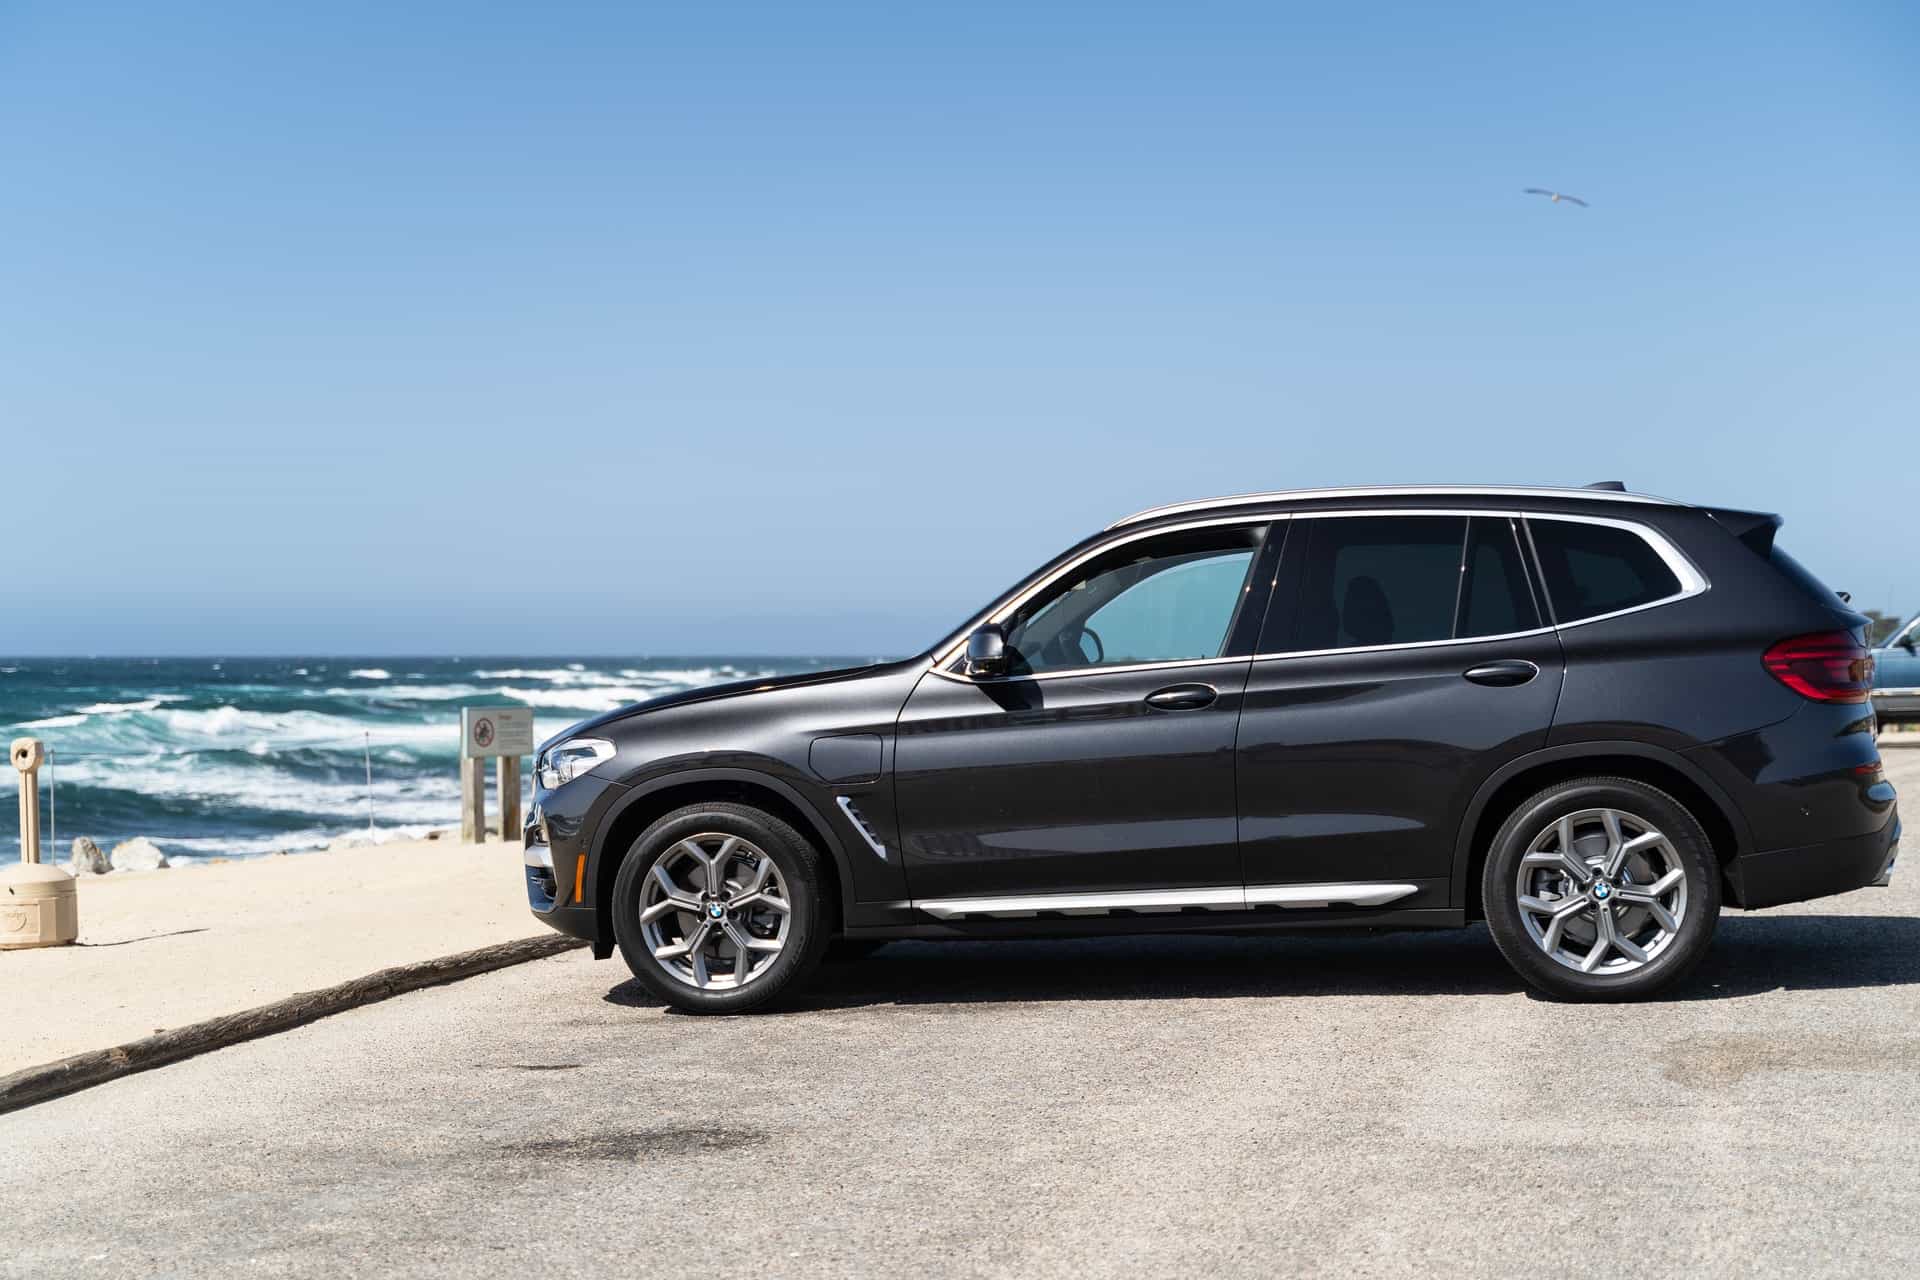 BMW X3 by the sea